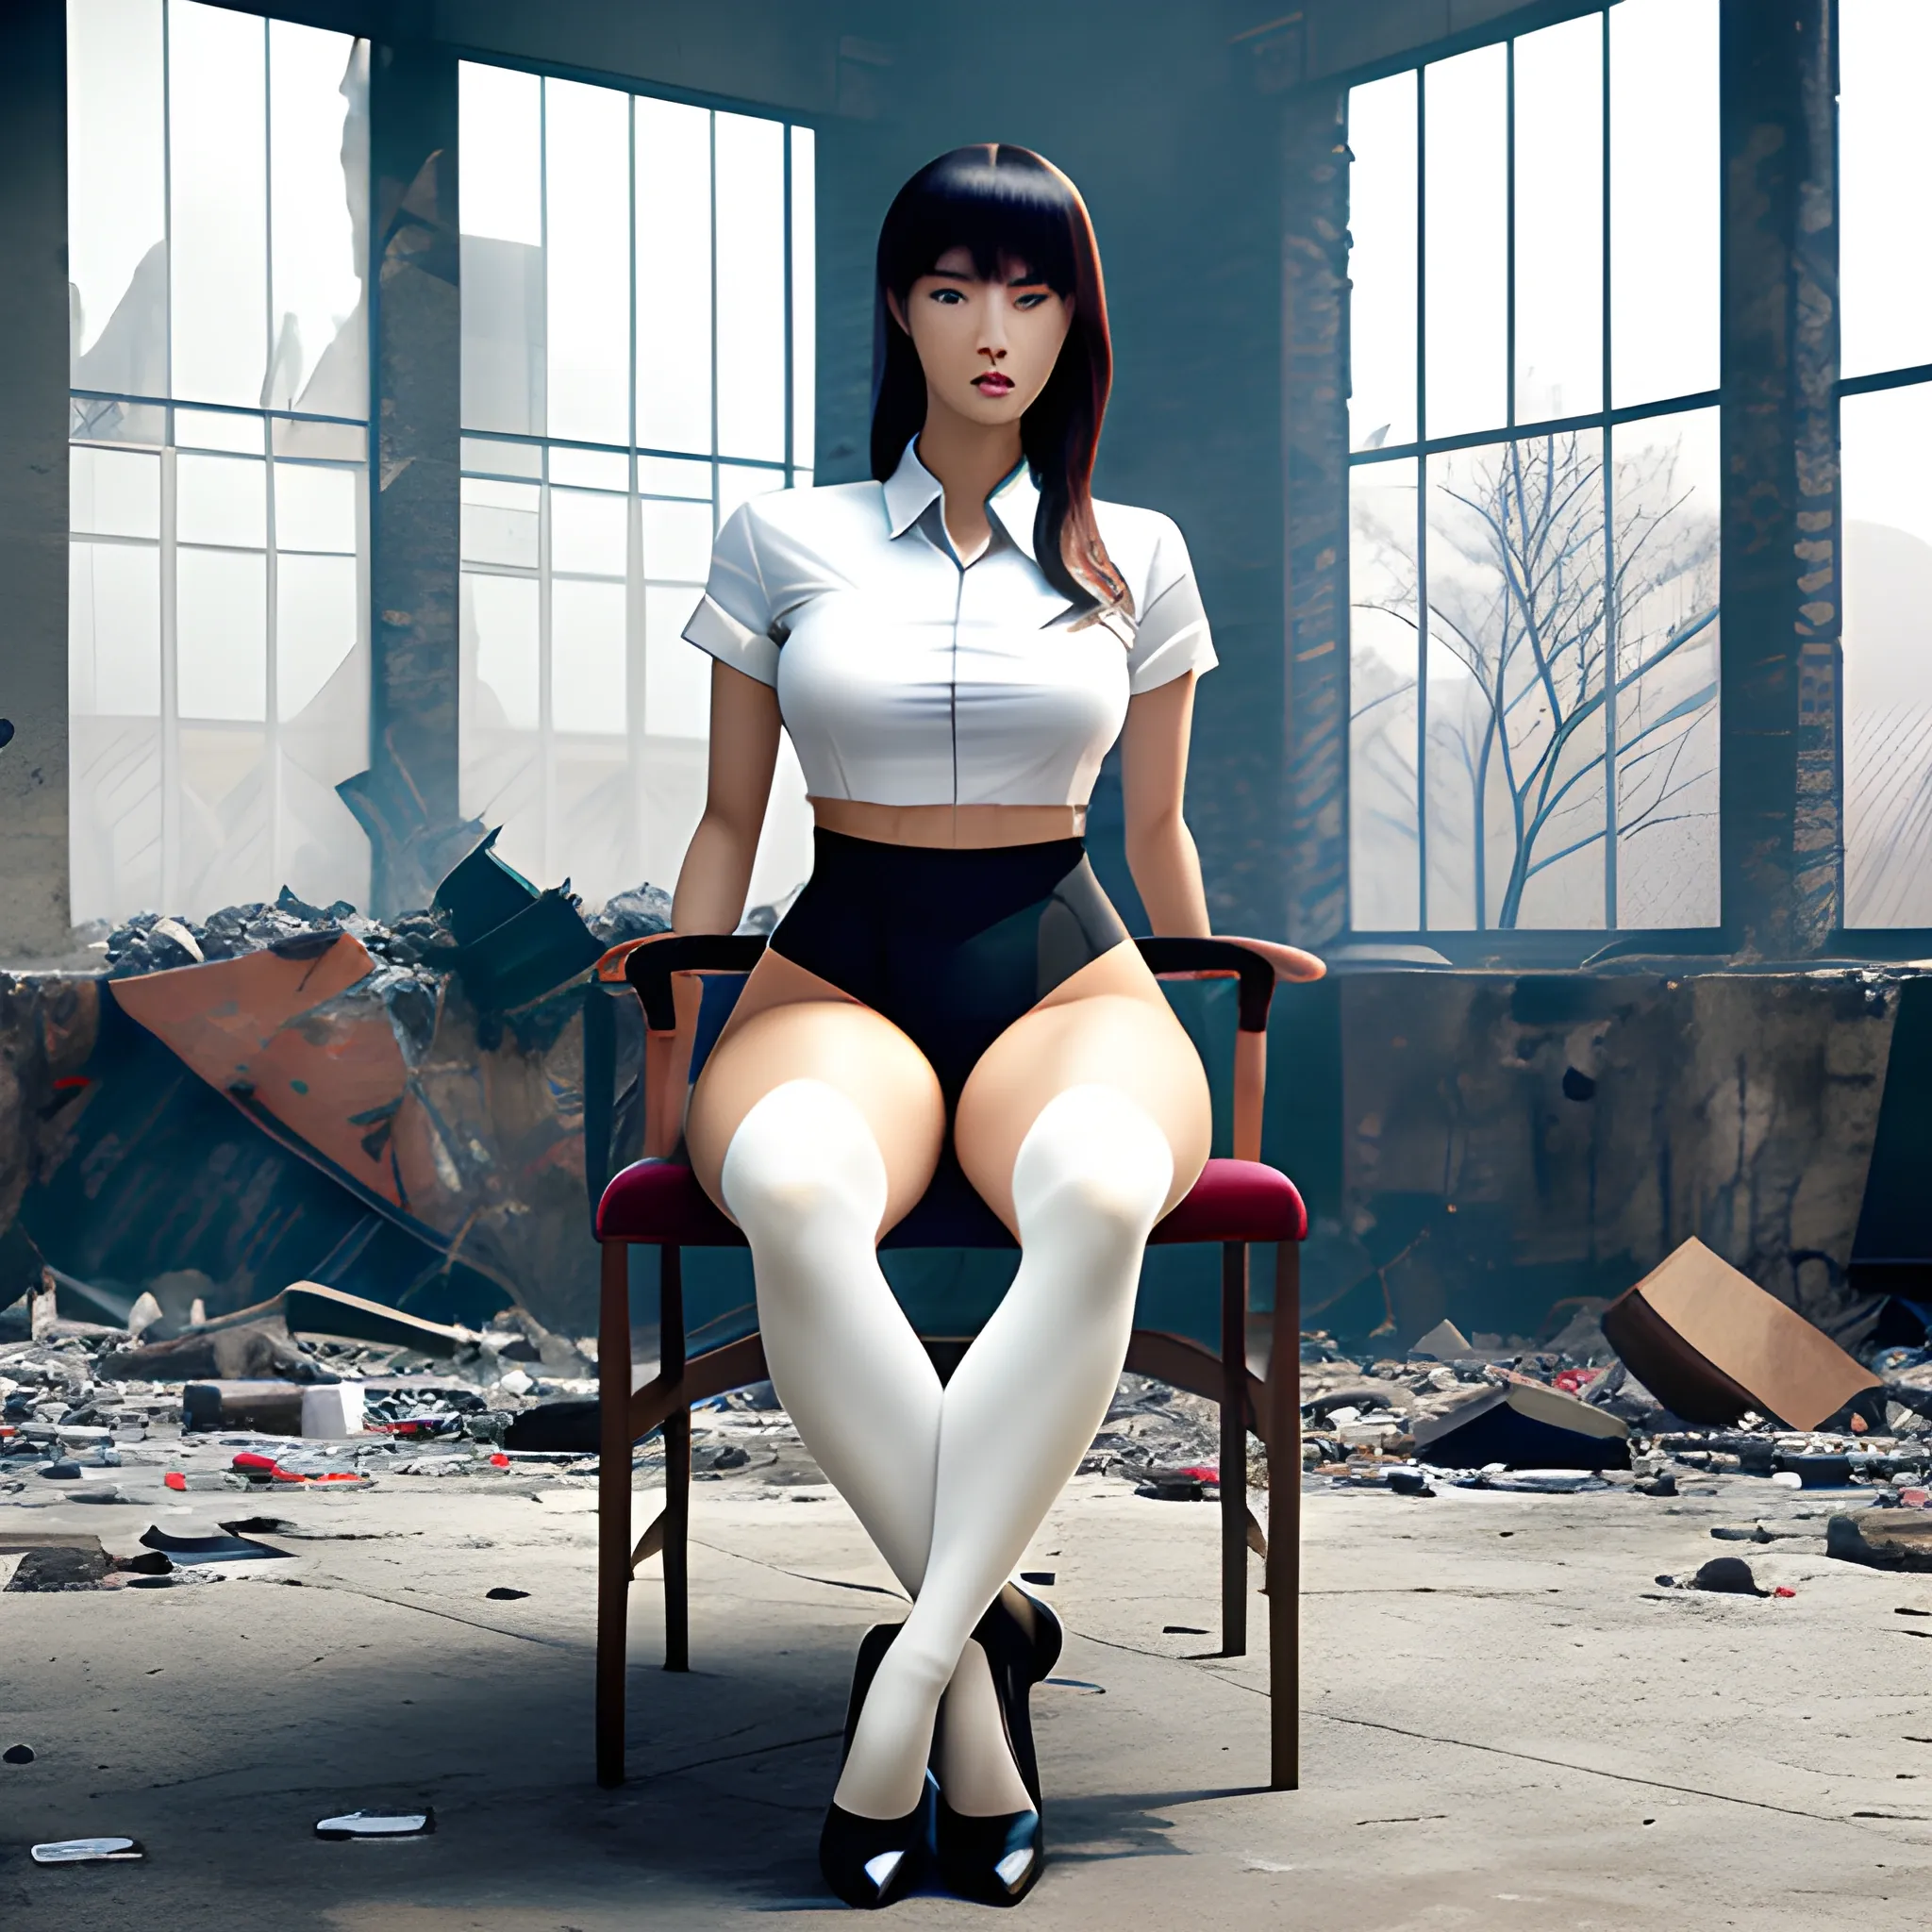 casual fashion shot of   korean cheap damsel in distress, wearing tights , cameltoe, longhaired, symmetric face, manga eyes,  full figure, fit,  tight white shirt, legs, knees, high heels, sitting on the chair in the demolished class, school, revenge, sinister art by Greg Rutkowski, 